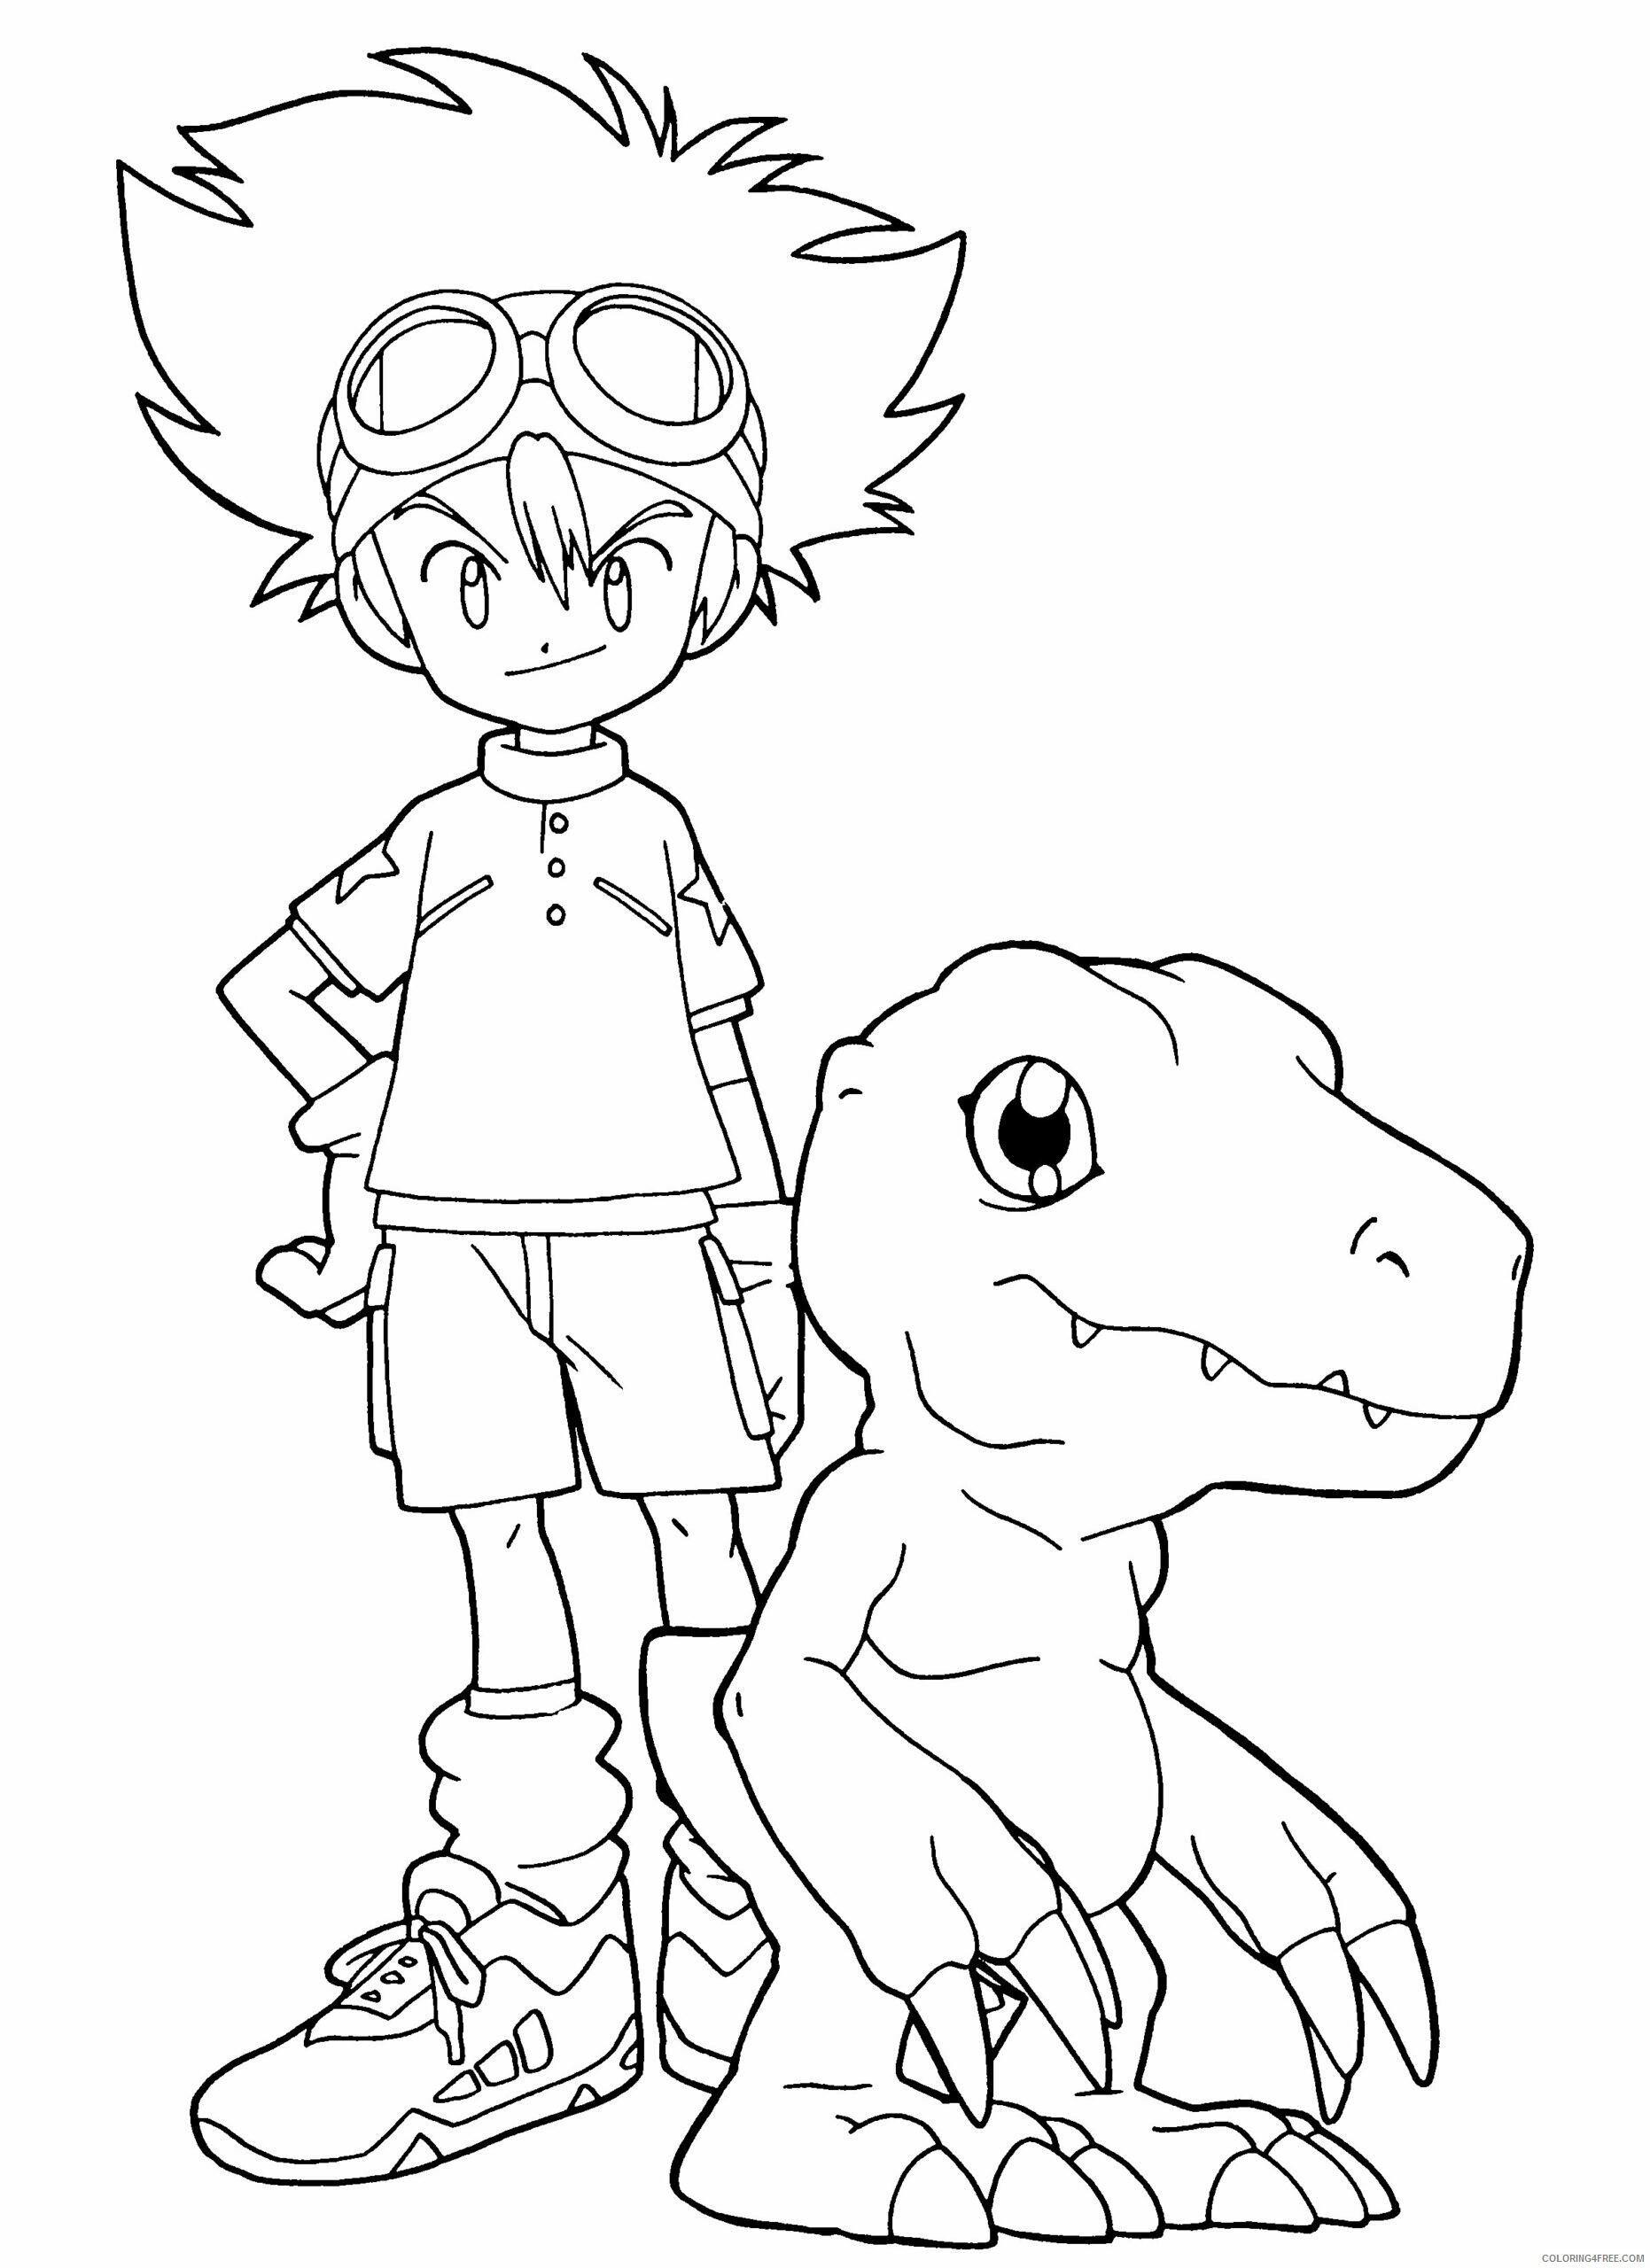 Digimon Printable Coloring Pages Anime Digimon 2021 0206 Coloring4free